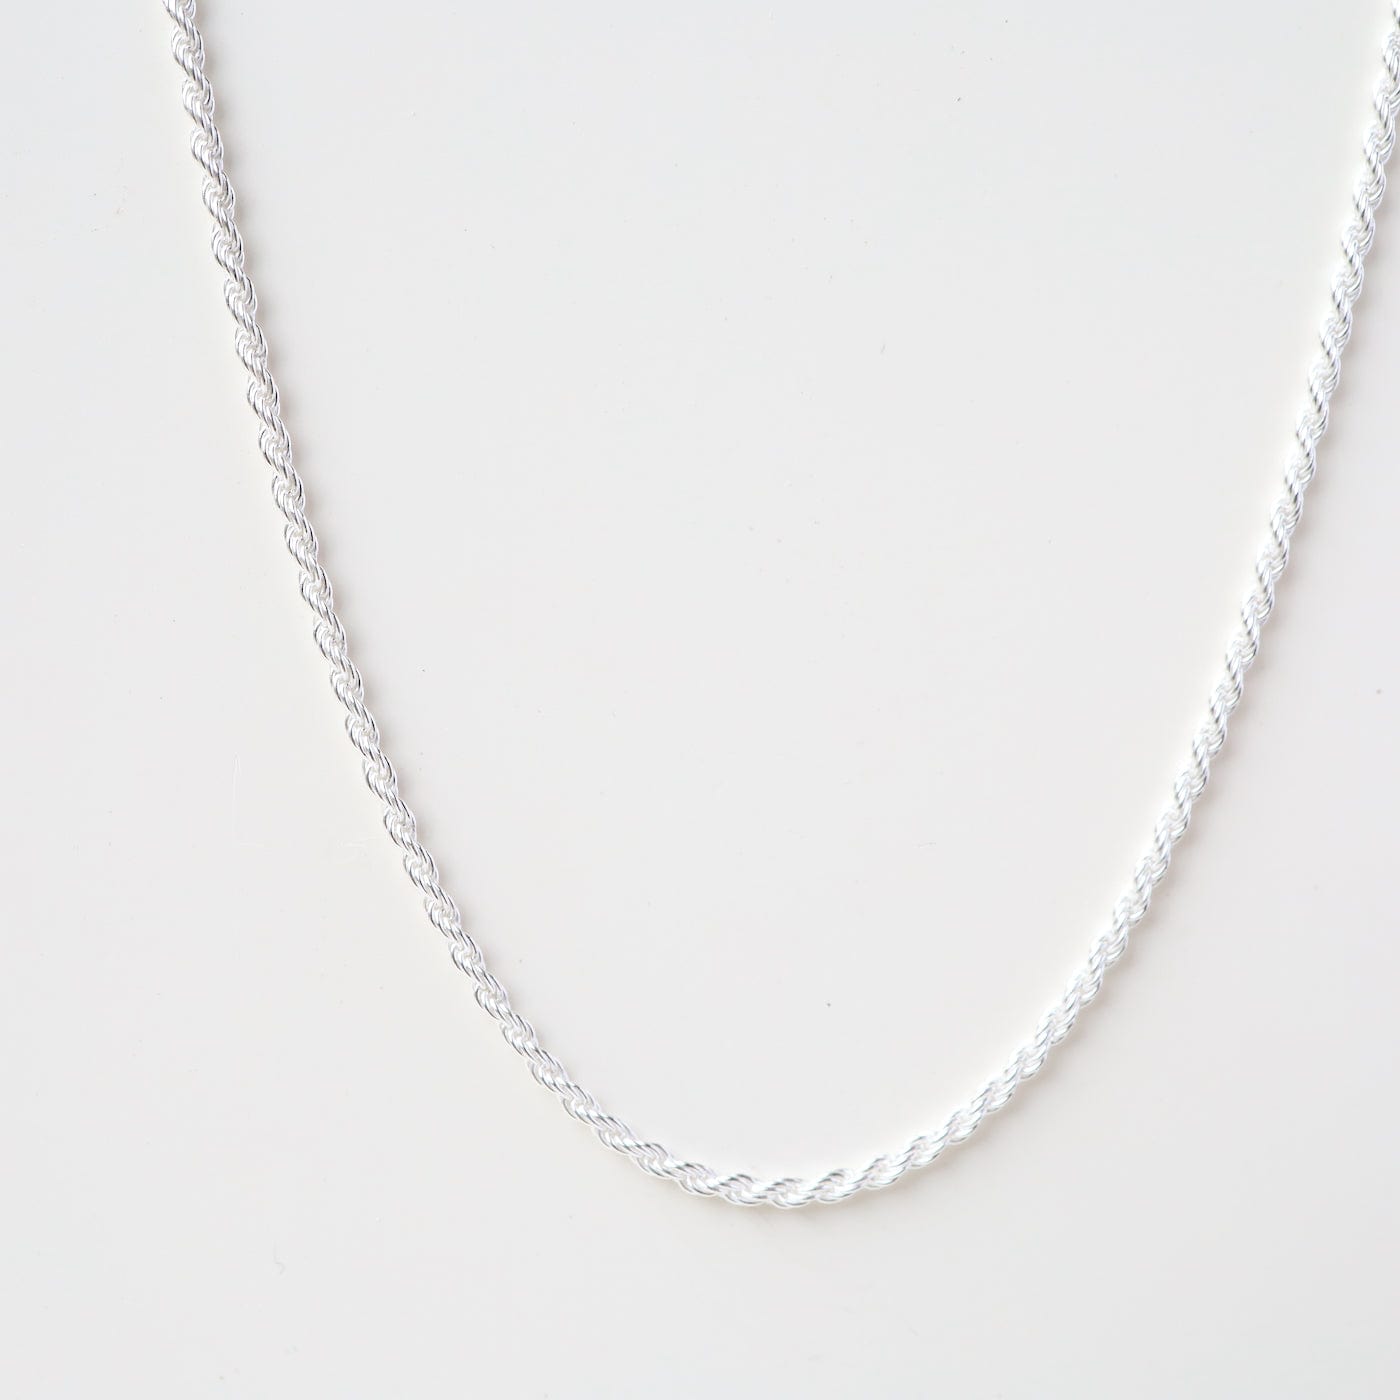 CHN Sterling Silver Rope Chain - 16"